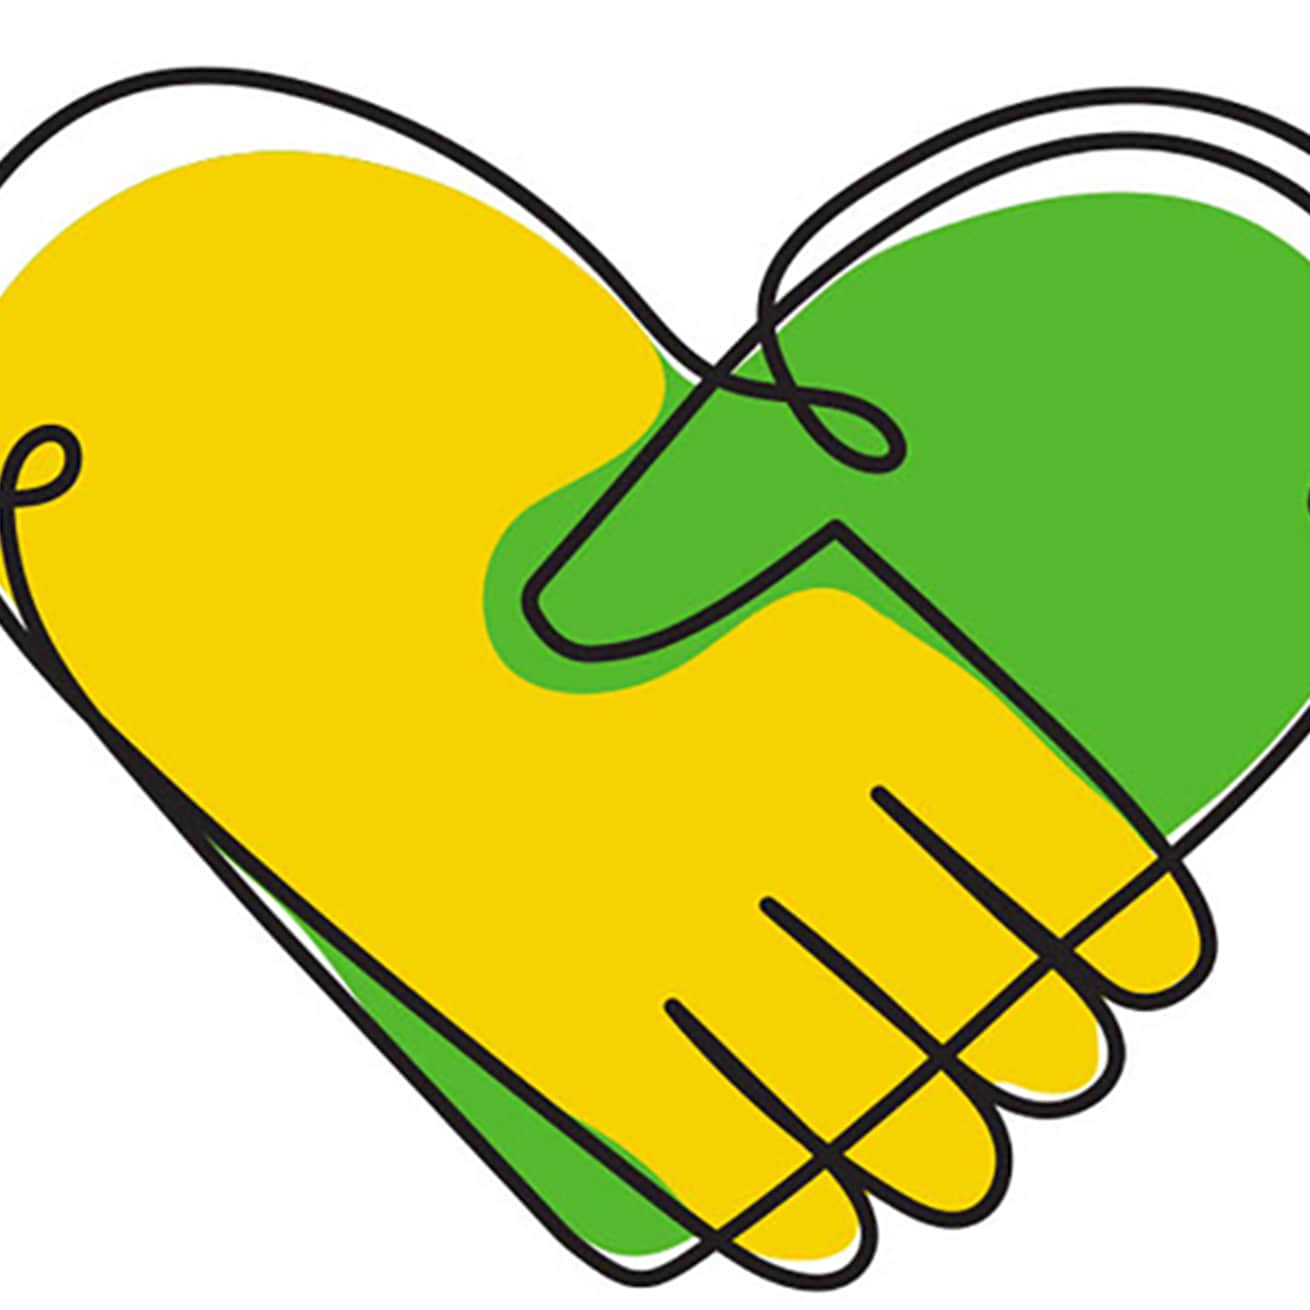 yellow and green hands shaking in a heart